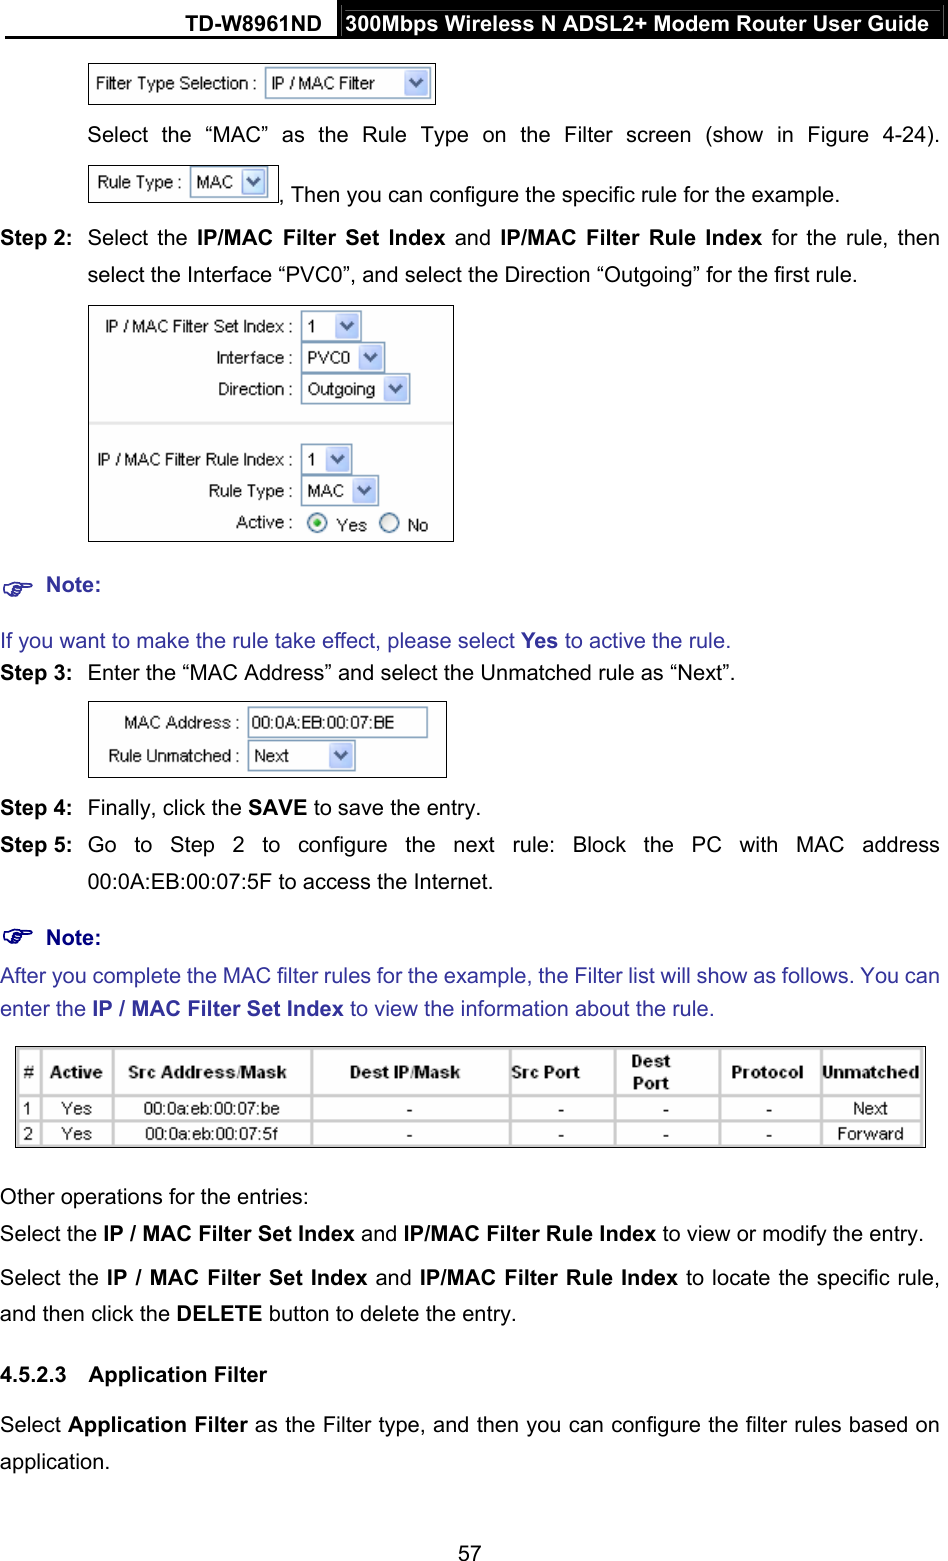 TD-W8961ND  300Mbps Wireless N ADSL2+ Modem Router User Guide  57 Select the “MAC” as the Rule Type on the Filter screen (show in Figure 4-24). , Then you can configure the specific rule for the example. Step 2:  Select the IP/MAC Filter Set Index and IP/MAC Filter Rule Index for the rule, then select the Interface “PVC0”, and select the Direction “Outgoing” for the first rule.   Note: If you want to make the rule take effect, please select Yes to active the rule. Step 3:  Enter the “MAC Address” and select the Unmatched rule as “Next”.  Step 4:  Finally, click the SAVE to save the entry. Step 5:  Go to Step 2 to configure the next rule: Block the PC with MAC address 00:0A:EB:00:07:5F to access the Internet.  Note: After you complete the MAC filter rules for the example, the Filter list will show as follows. You can enter the IP / MAC Filter Set Index to view the information about the rule.  Other operations for the entries: Select the IP / MAC Filter Set Index and IP/MAC Filter Rule Index to view or modify the entry. Select the IP / MAC Filter Set Index and IP/MAC Filter Rule Index to locate the specific rule, and then click the DELETE button to delete the entry. 4.5.2.3 Application Filter Select Application Filter as the Filter type, and then you can configure the filter rules based on application. 